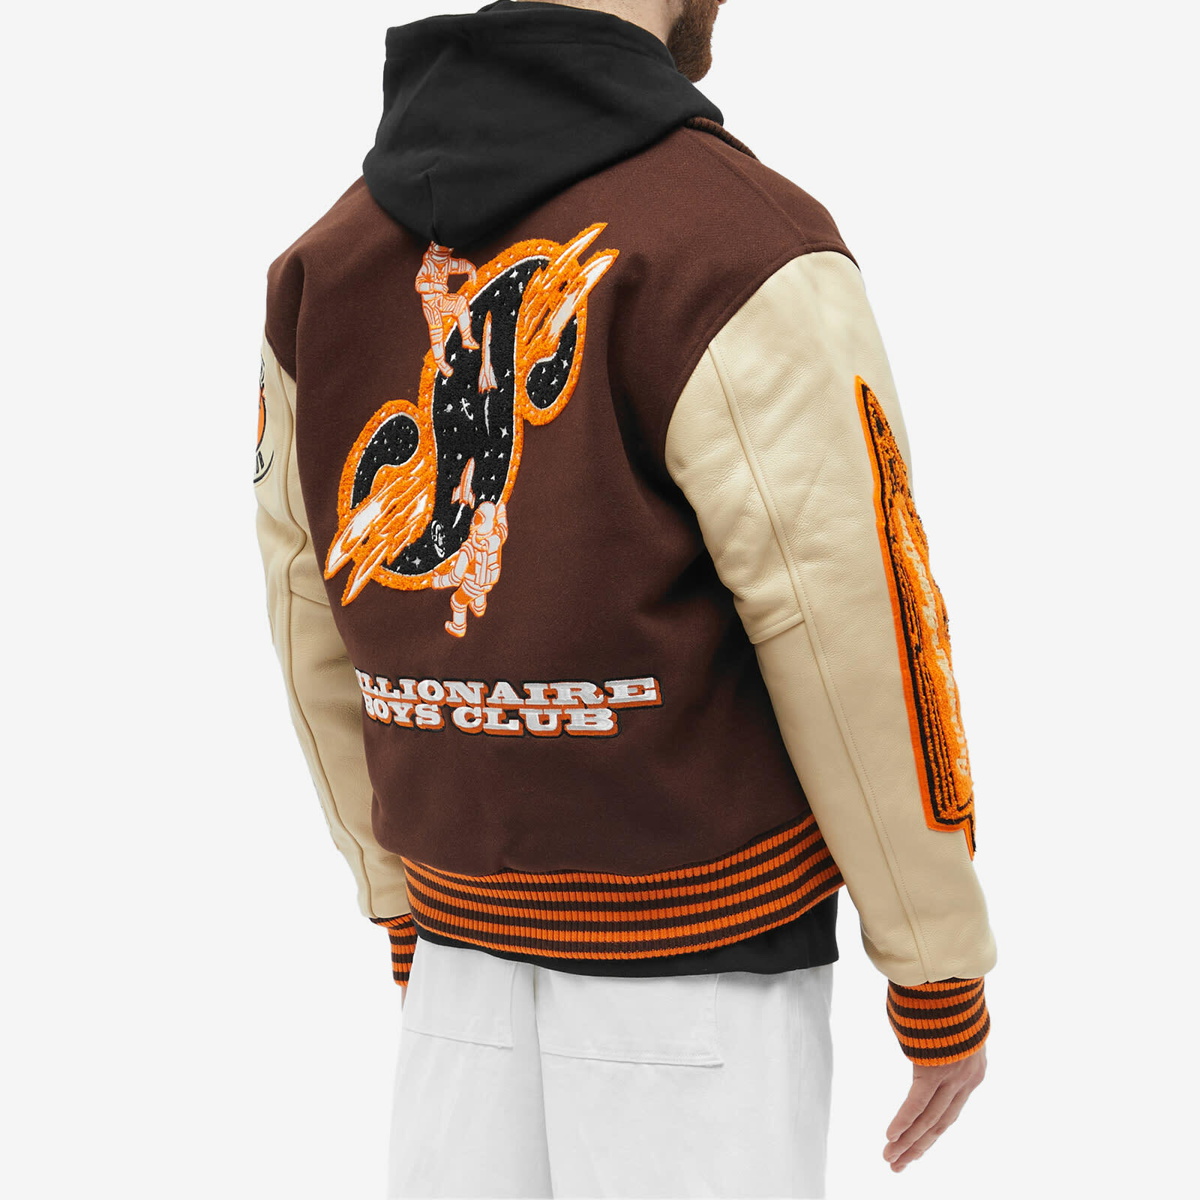 BBCICECREAM S Leather Sleeve Galaxy Varsity Jacket in Brown for